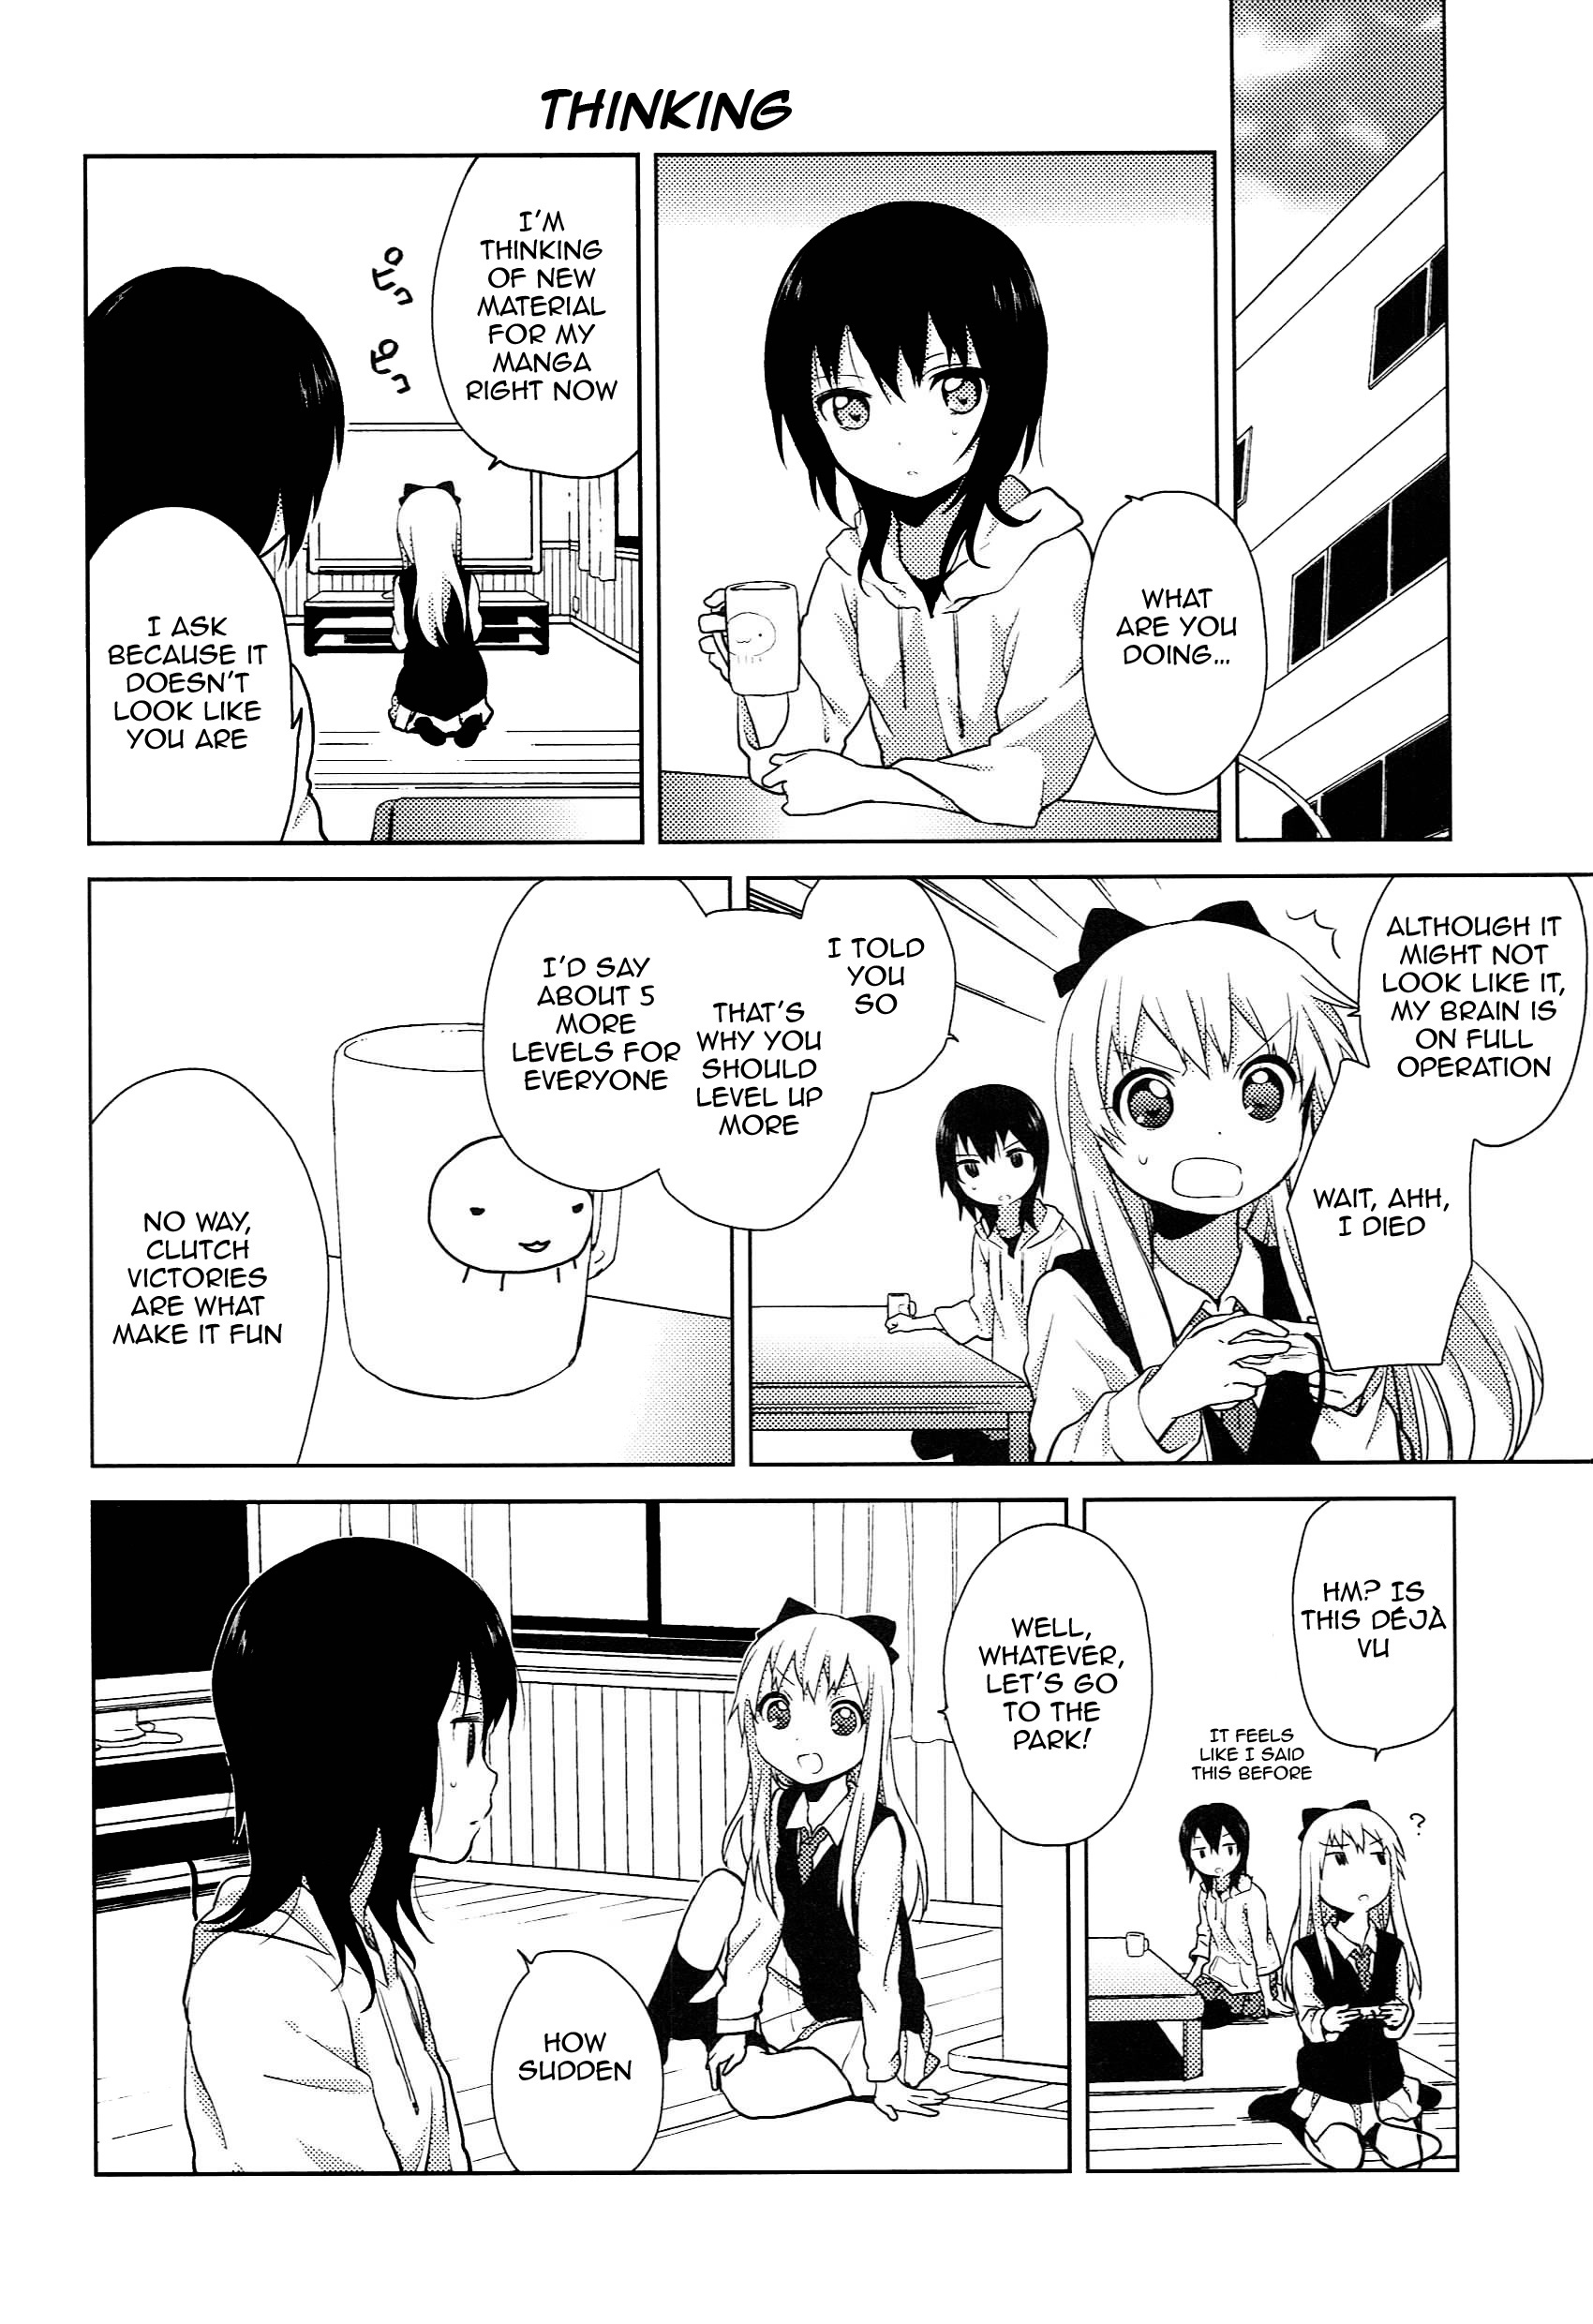 Yuru Yuri Vol.6 Chapter 51.08: Special 6 - The Room, The Final Boss, And I - Picture 2